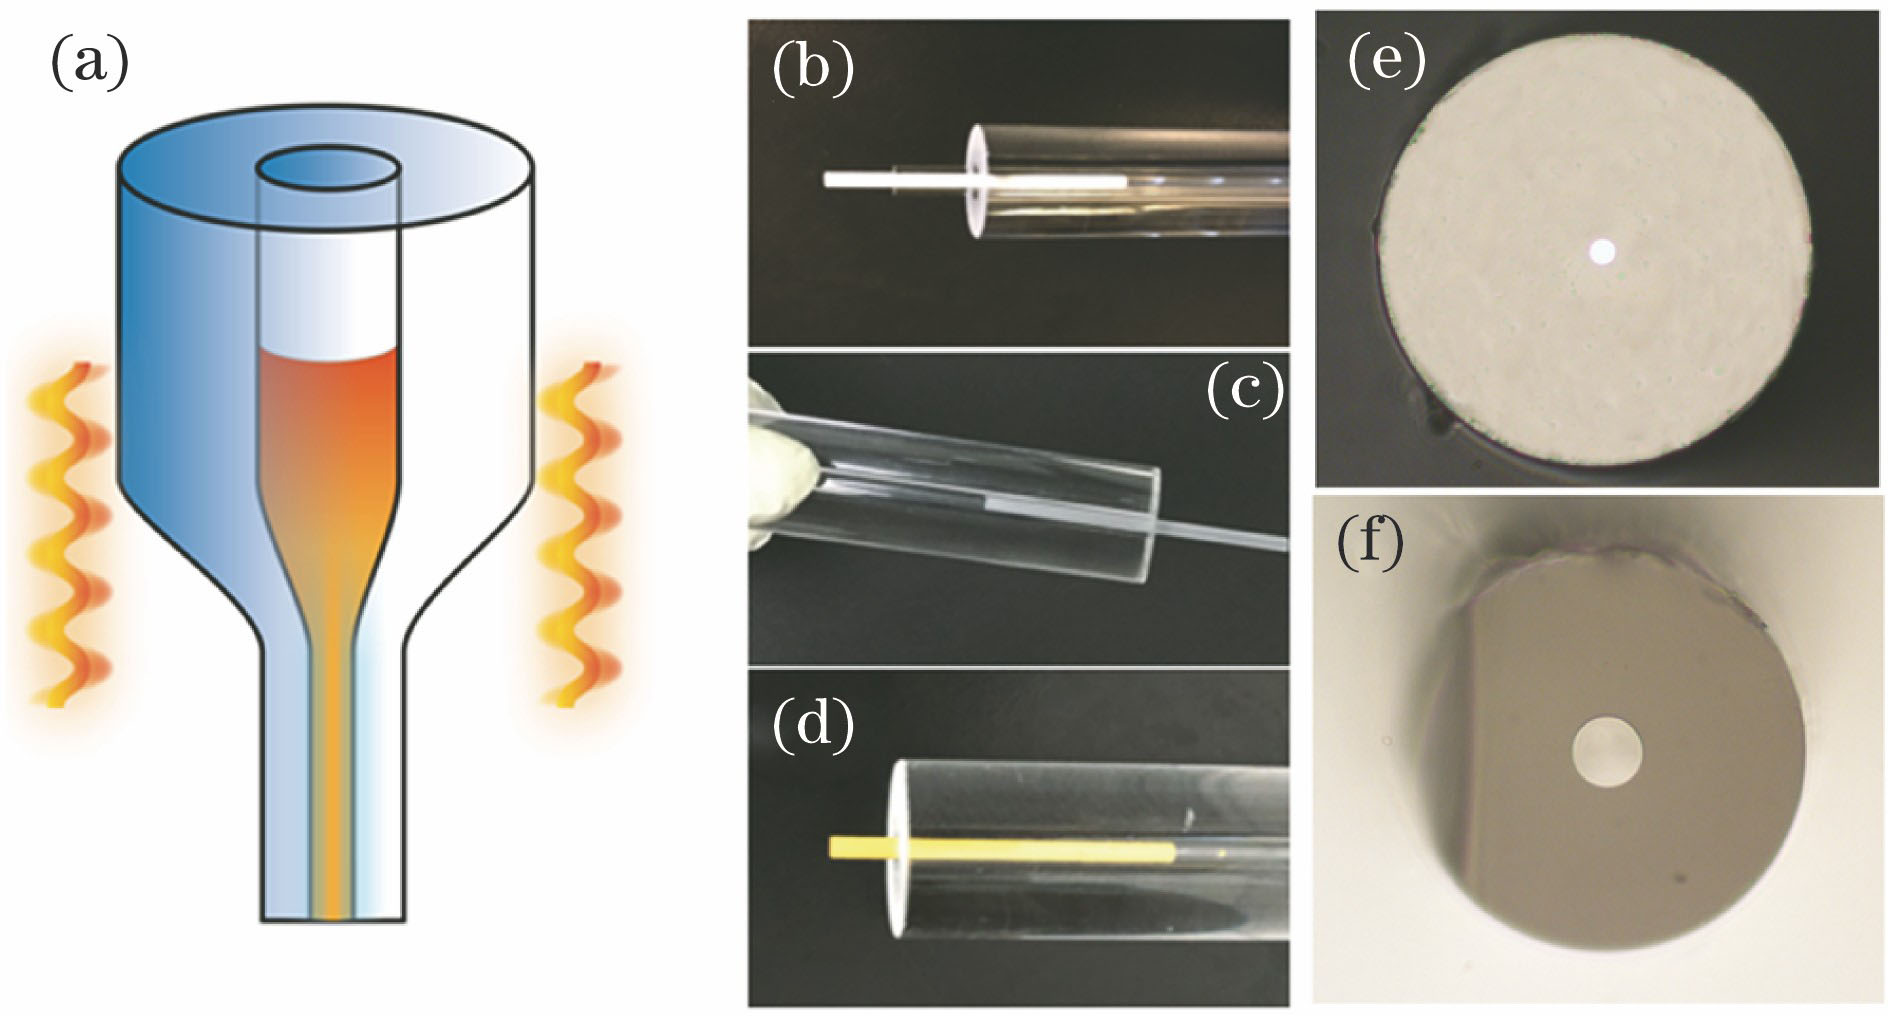 Fabrication of optical fiber by melt-in-tube method. (a) Diagram of fiber drawing process; (b)-(d) fiber preforms based on ceramics or crystals; (e)-(f) cross sections of prepared optical fiber